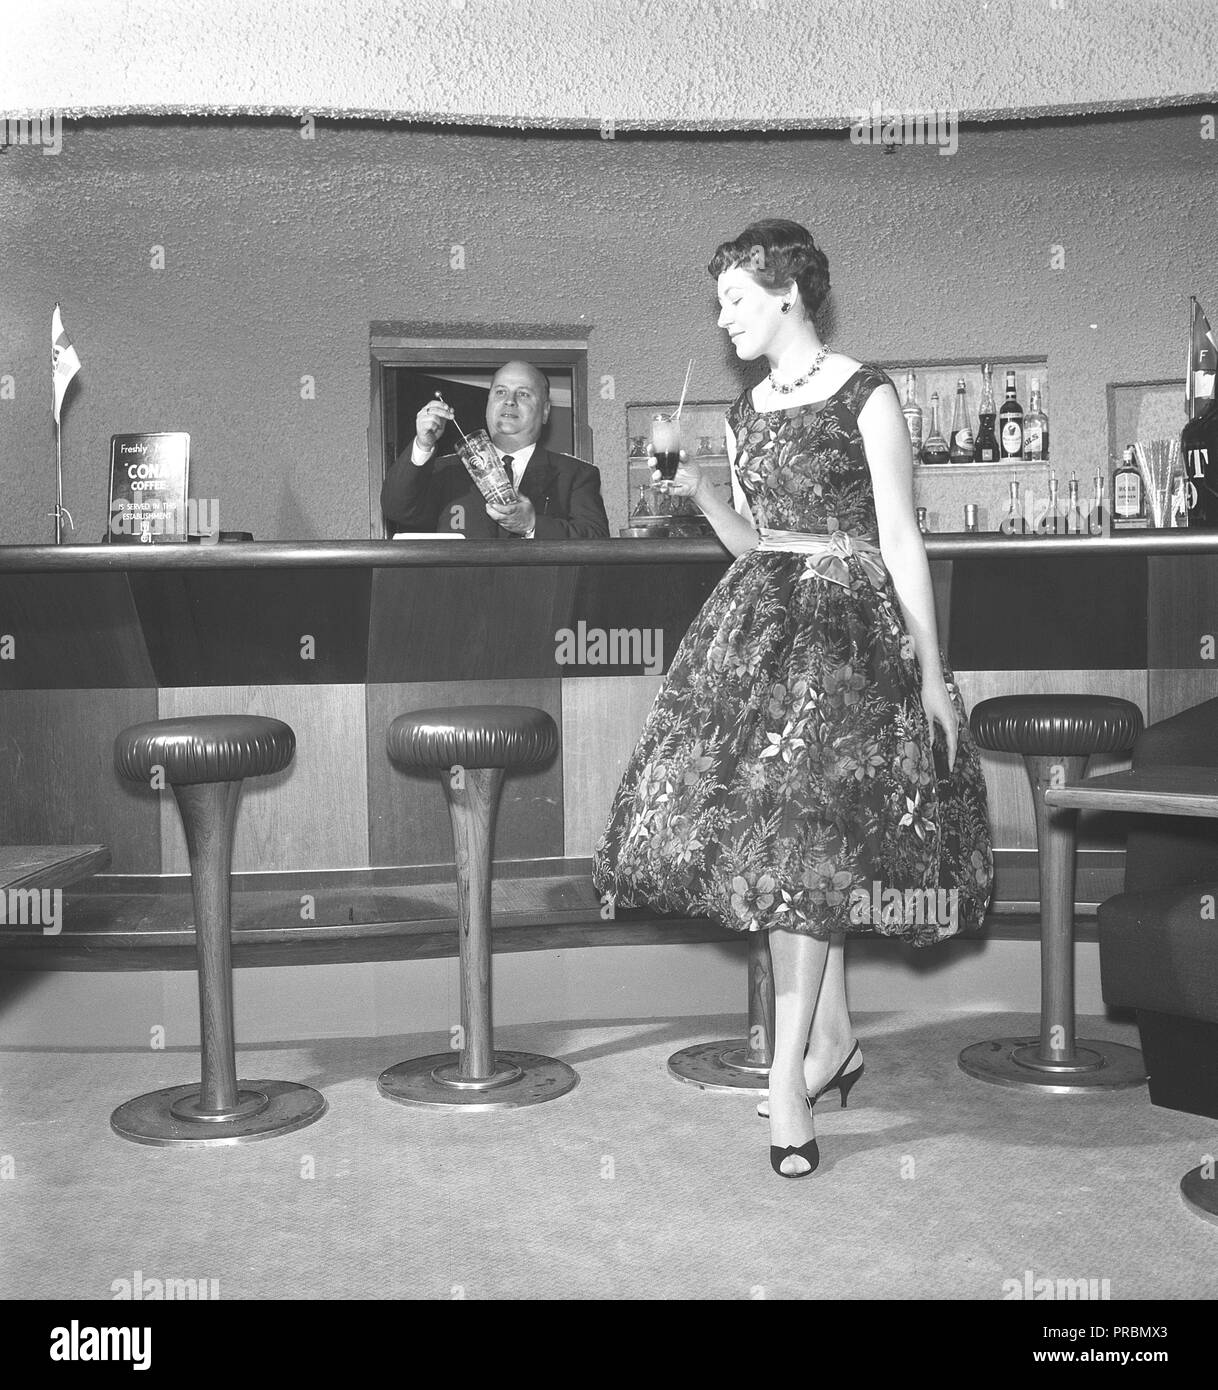 Woman in the 1950s. A young woman is standing in a bar with a drink in her hand. She is wearing a fashionable dress with flowers. Sweden 1956. Photo Kristoffersson Ref BY71-5 Stock Photo